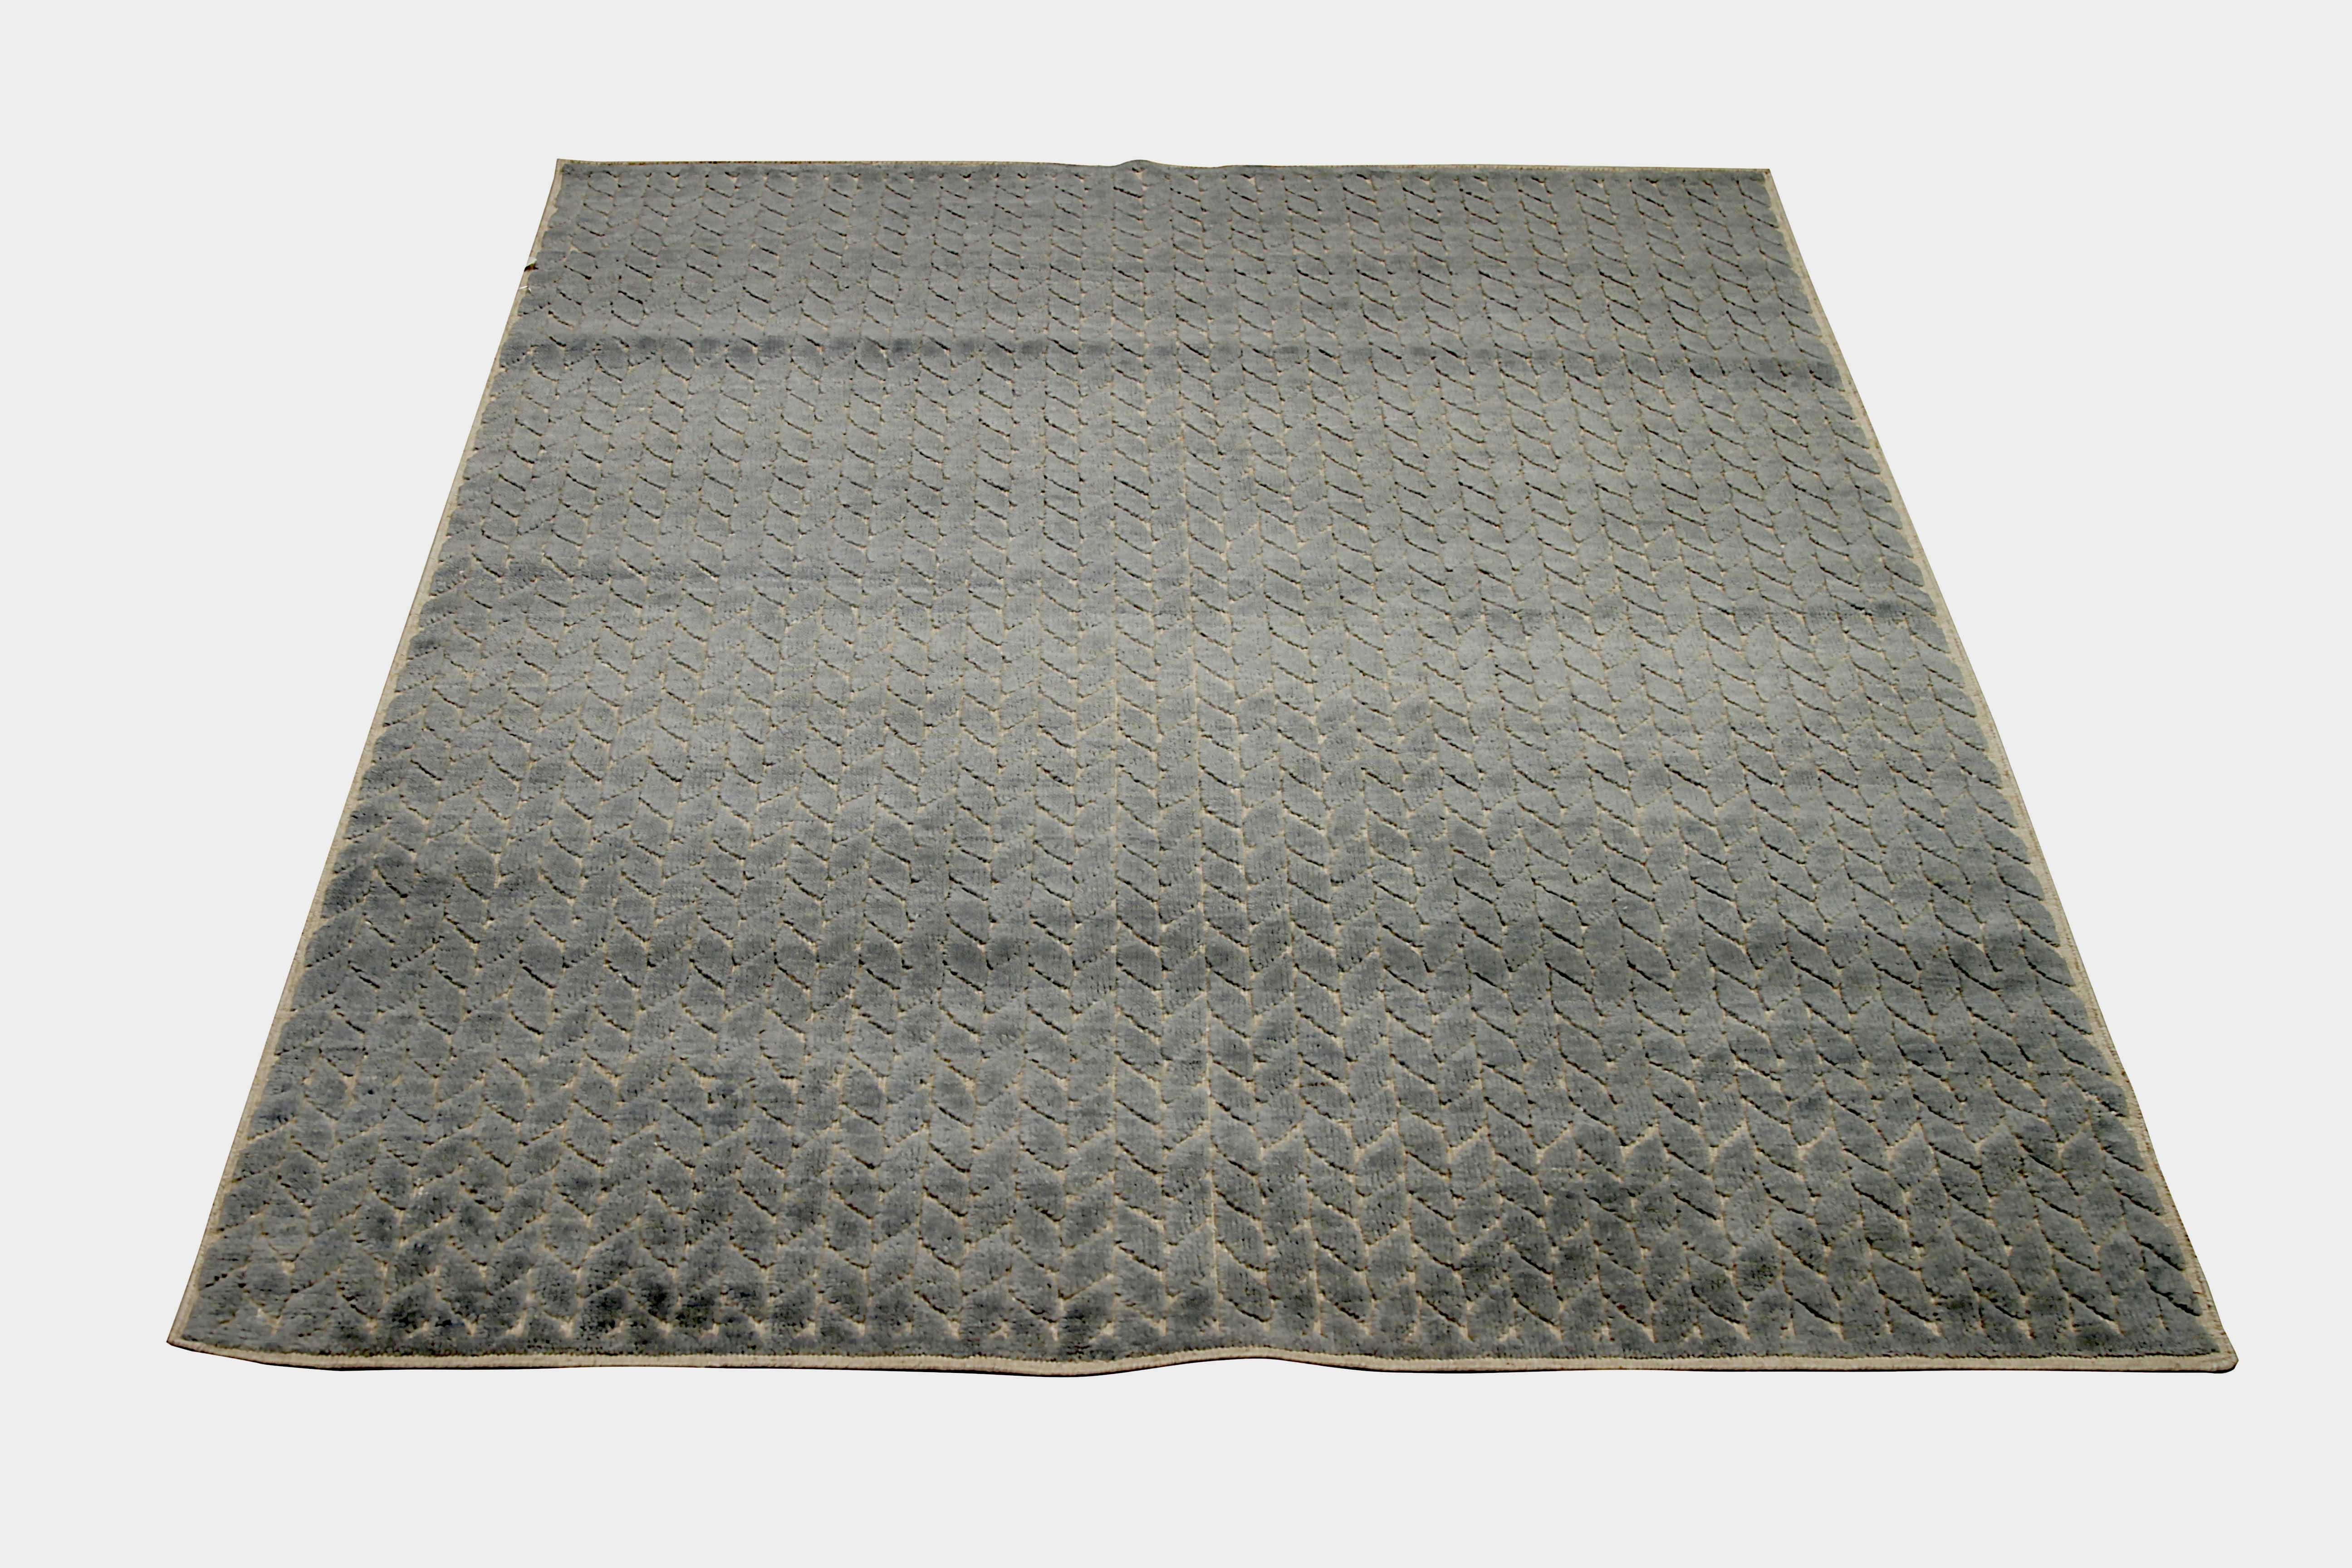 New area rug handwoven from the finest sheep’s wool. It’s colored with all-natural vegetable dyes that are safe for humans and pets. It has a nice 6’ x 8’ dimension that works perfectly in small to medium-sized rooms.

Cameron Collection is our